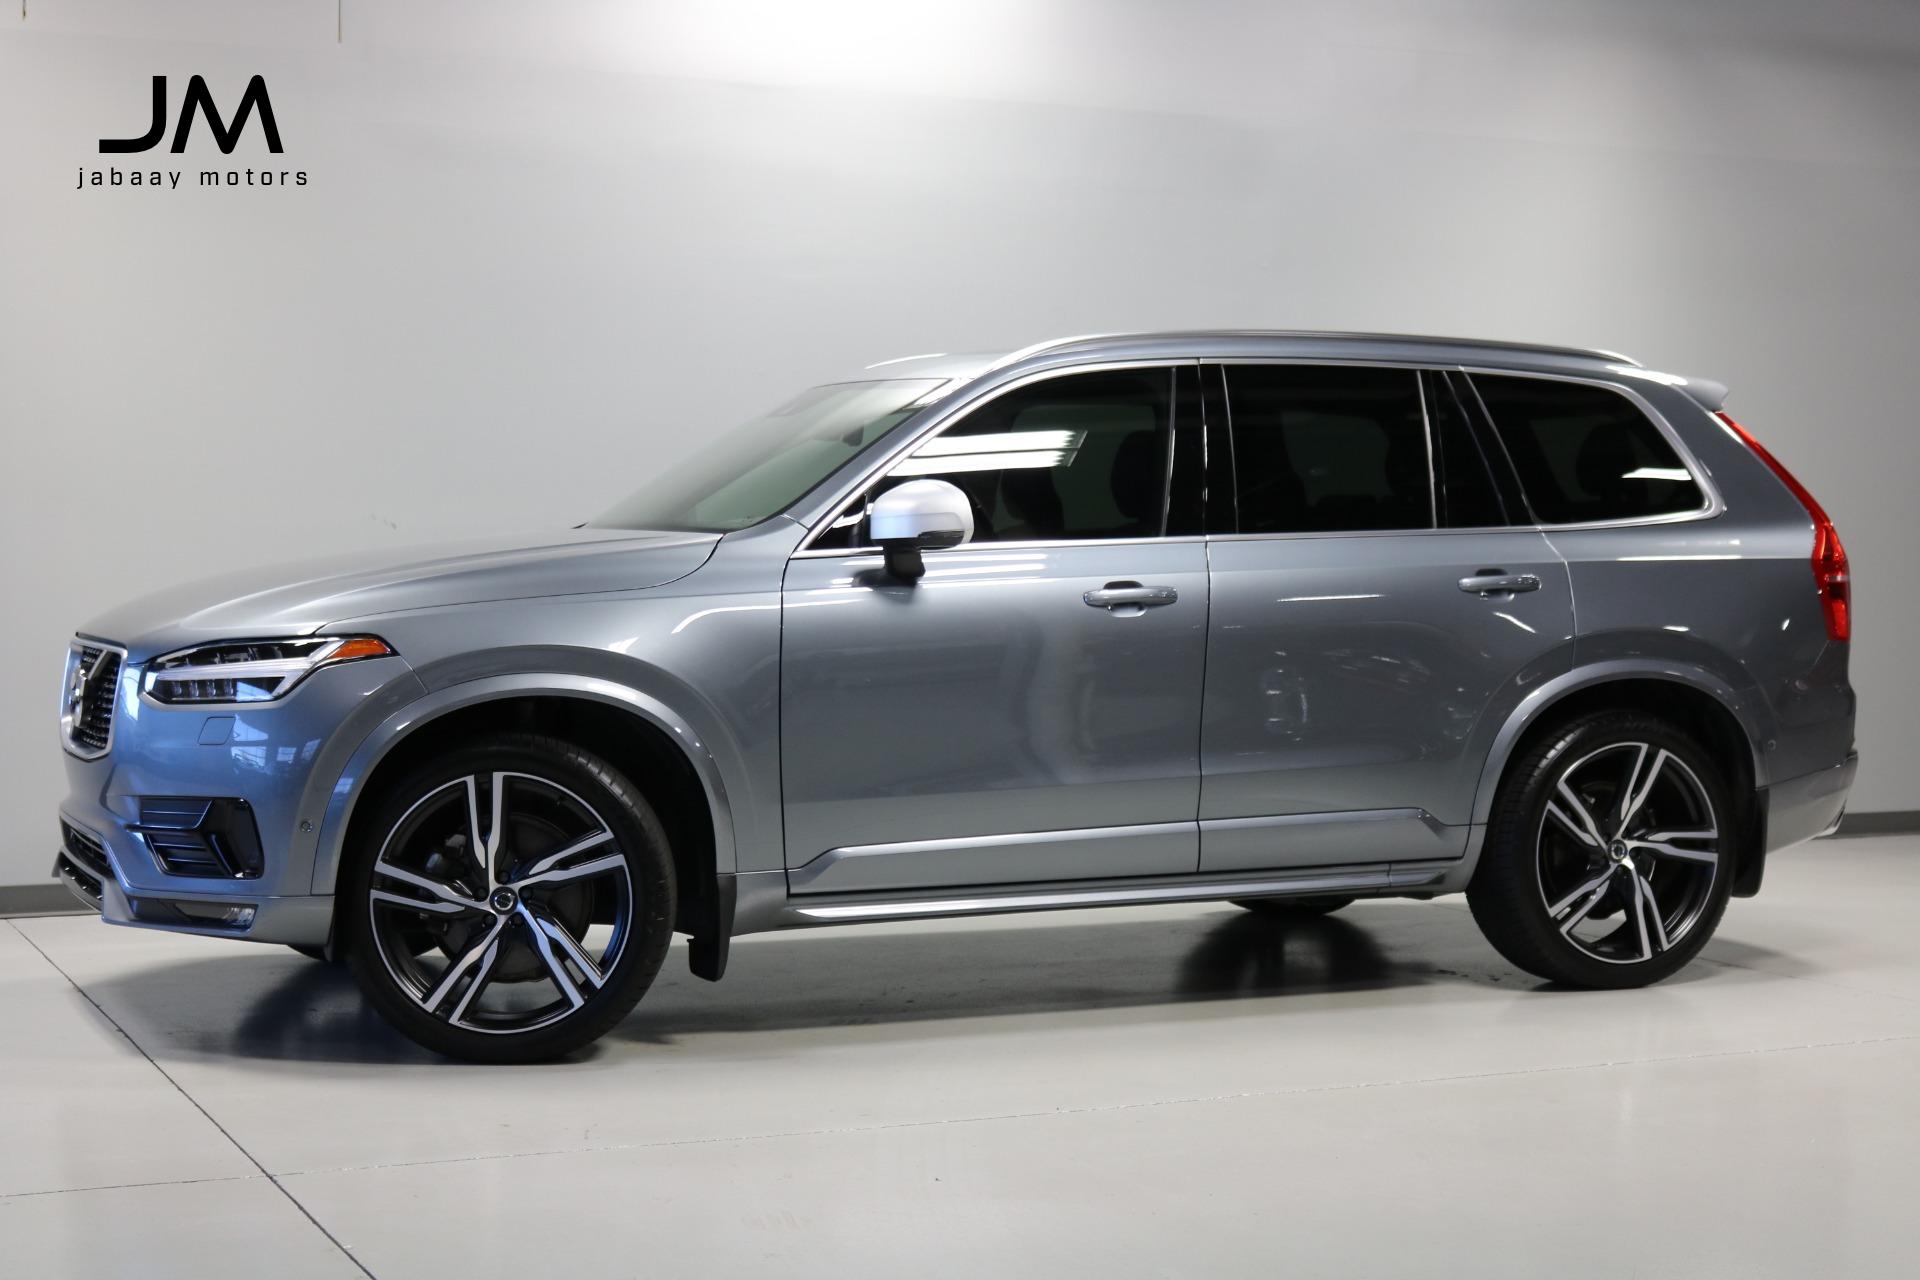 Used 2017 Volvo XC90 T6 RDesign For Sale (Sold) Jabaay